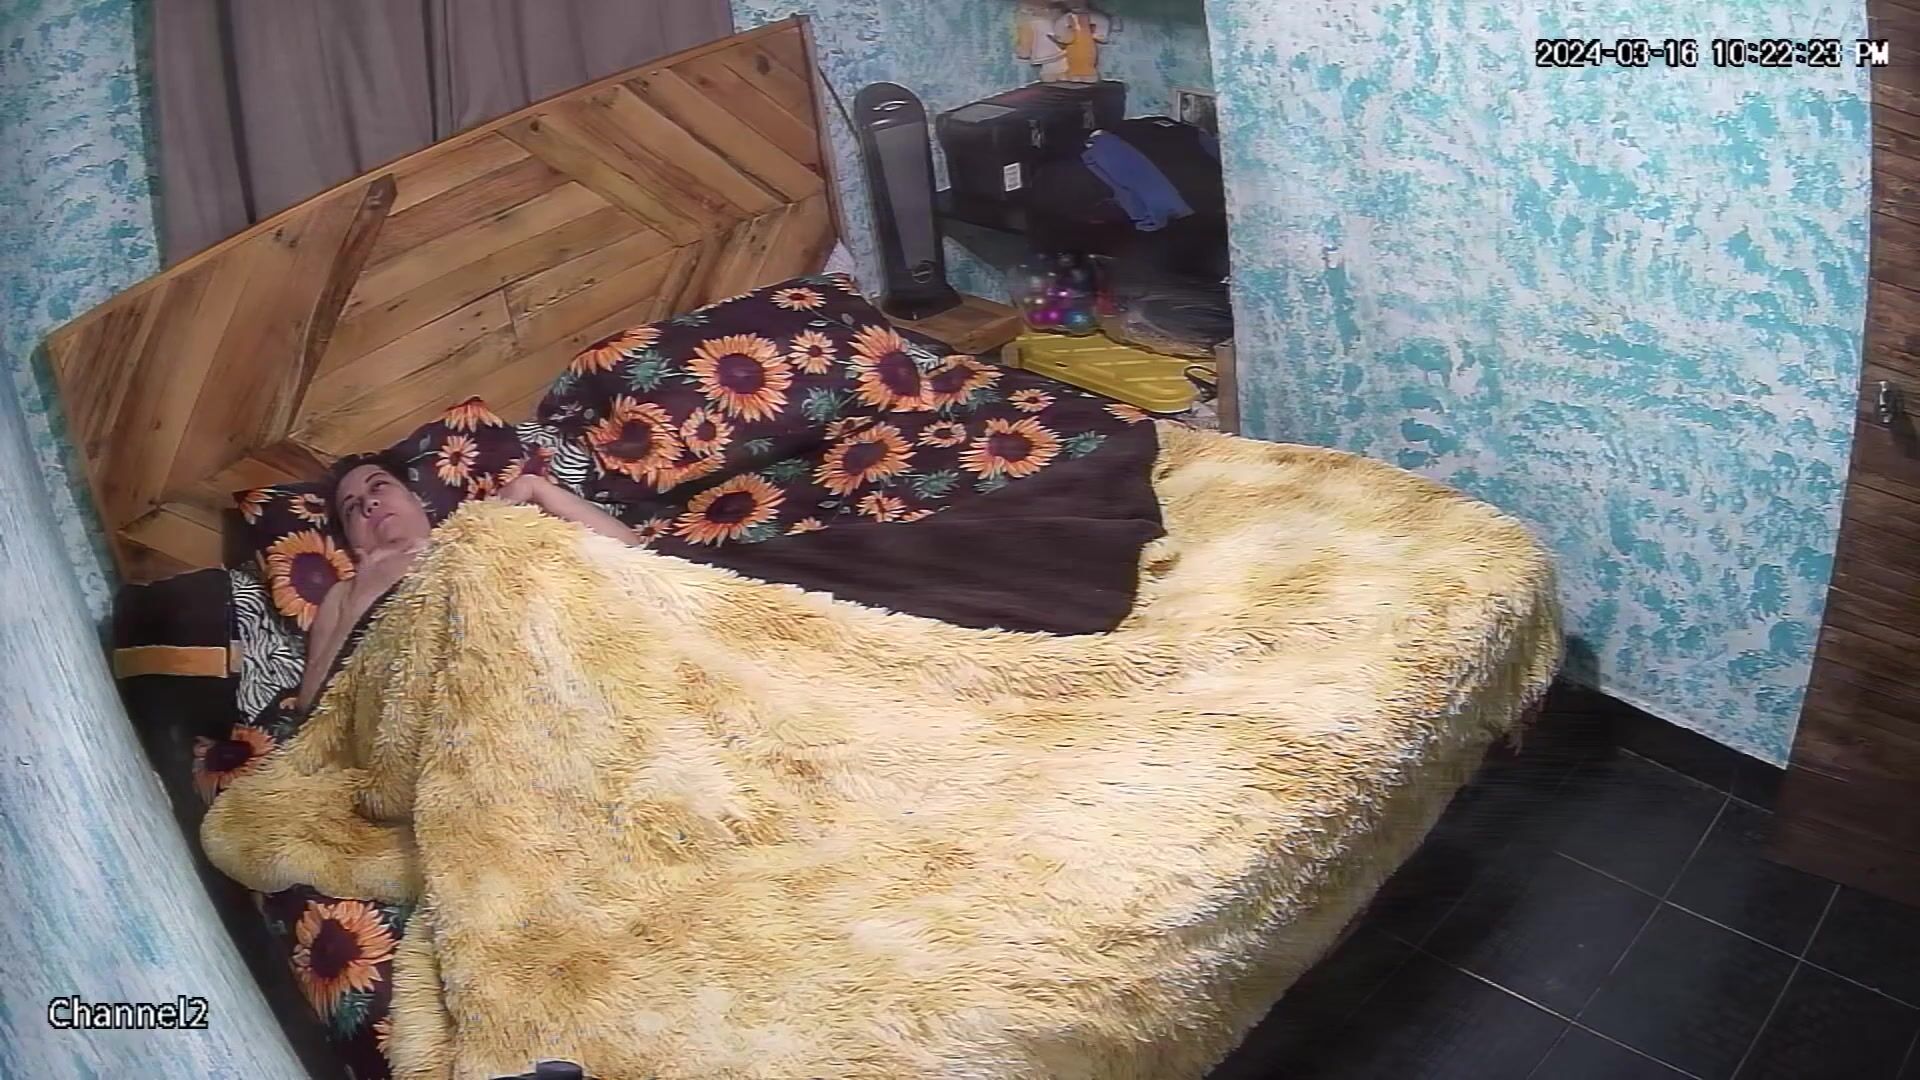 Amazing Greek married coiple having sex in their daughter’s room leaked record